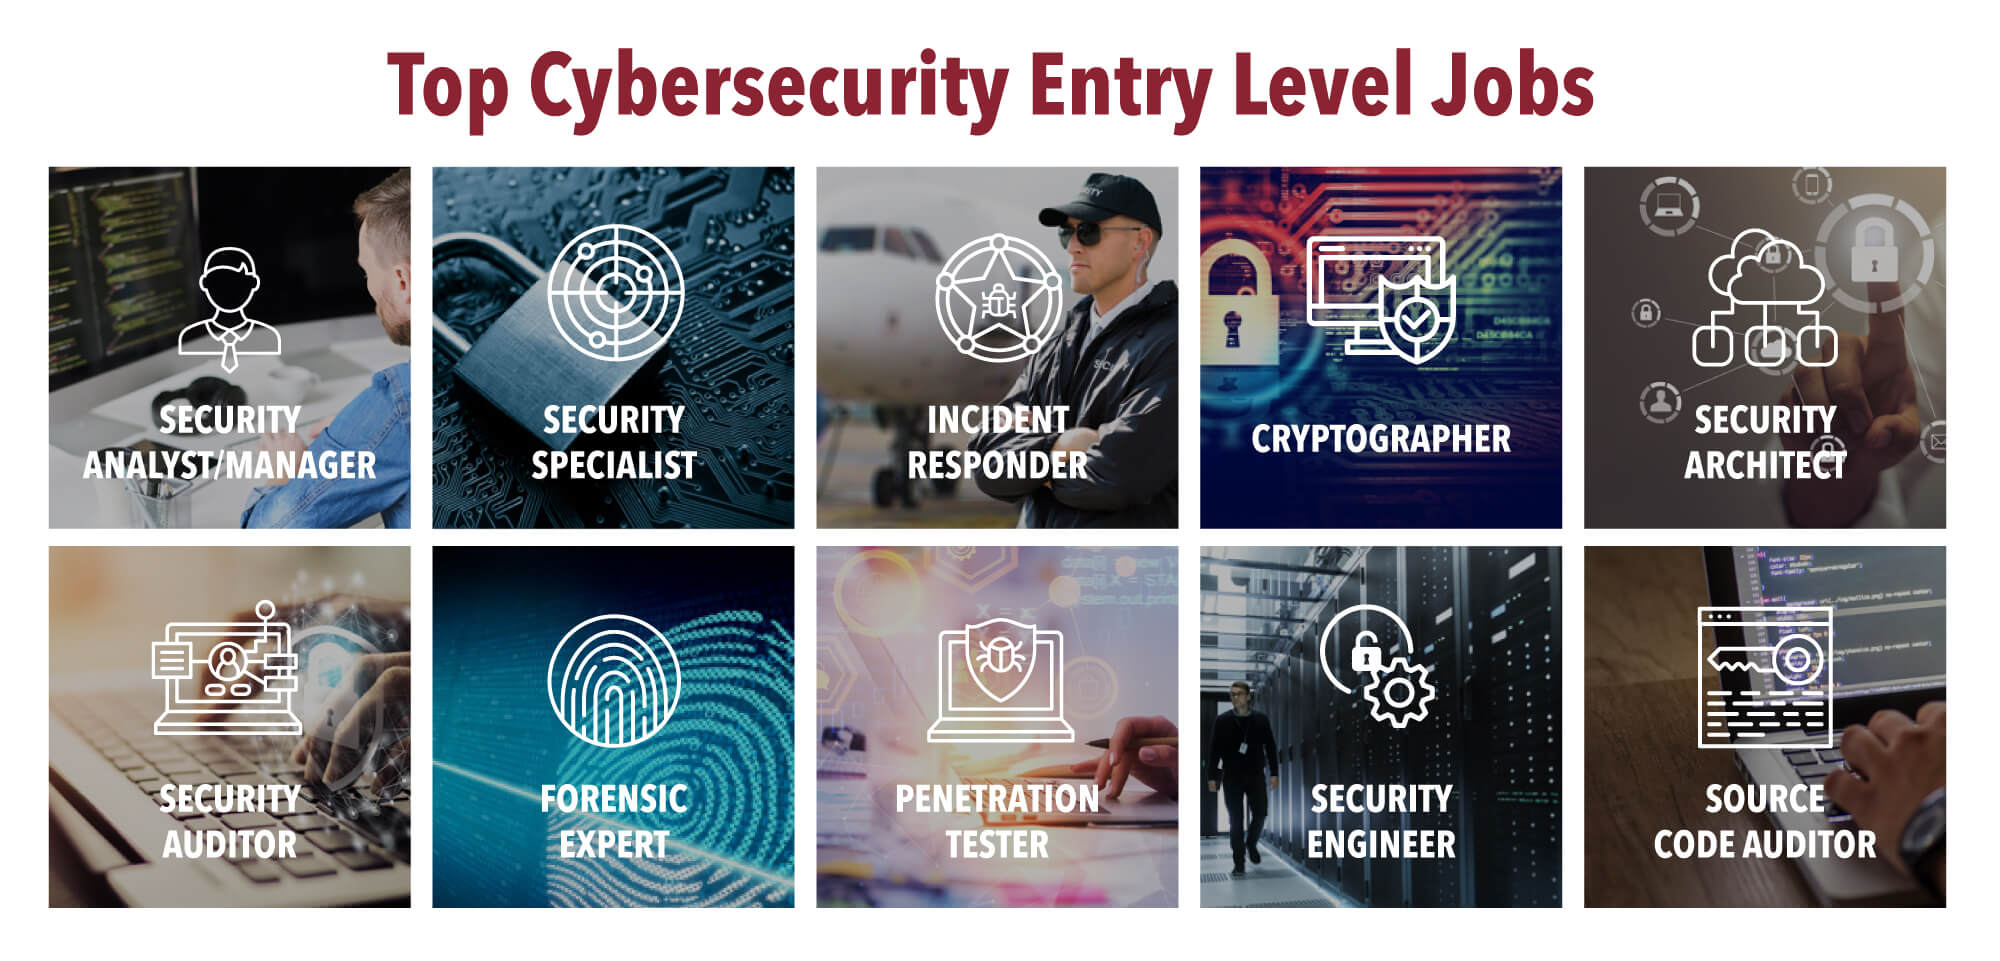 What Are Cybersecurity Jobs